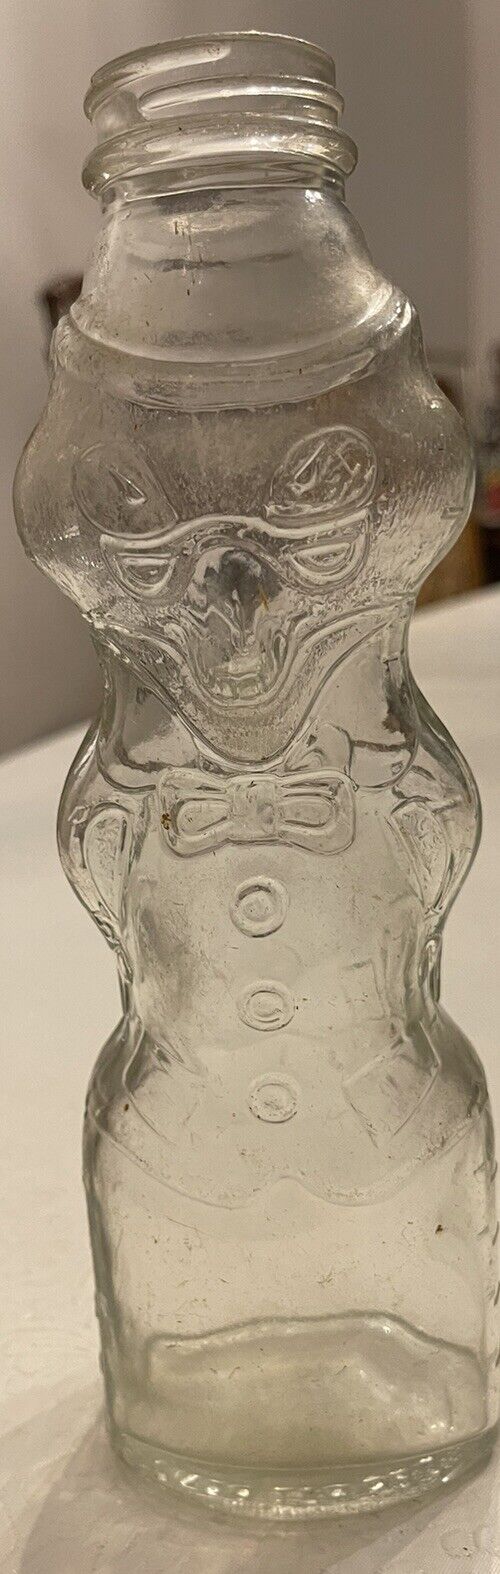 Vintage H. Fox & Co Glass Clown Bottle Figural Double Sided No Screw Top